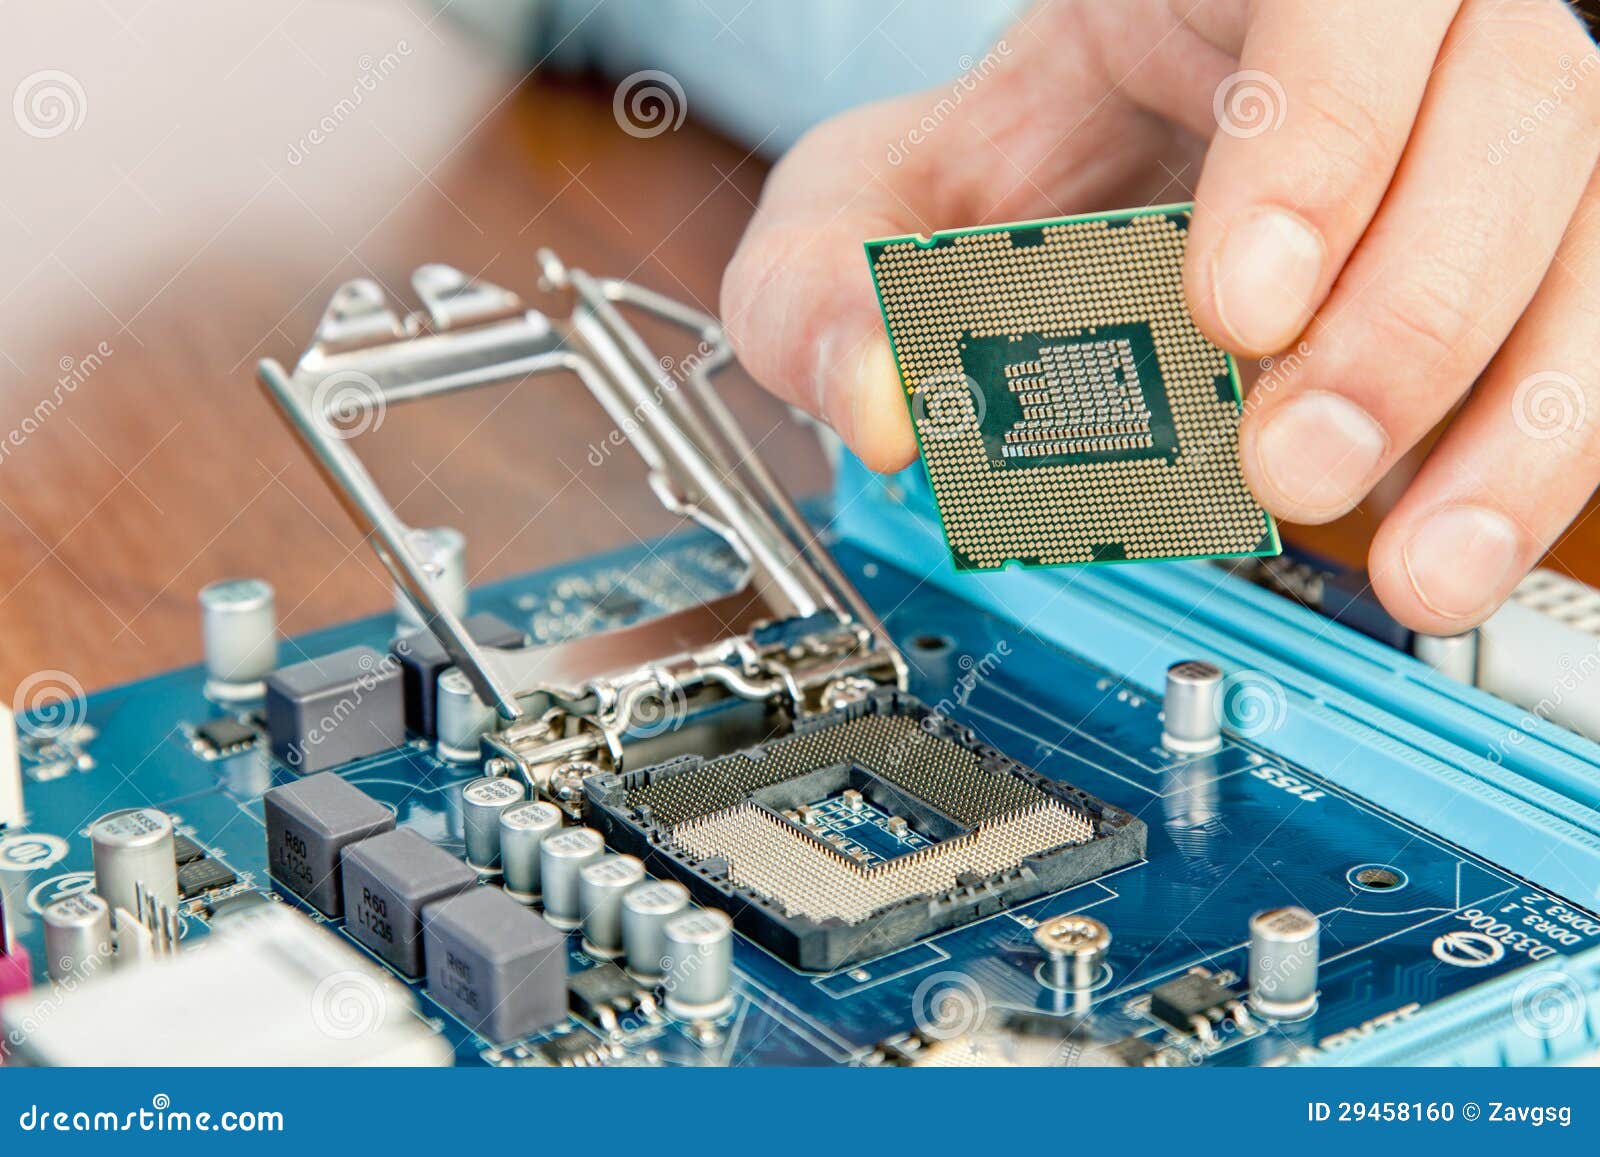 technician repairing computer hardware in the lab